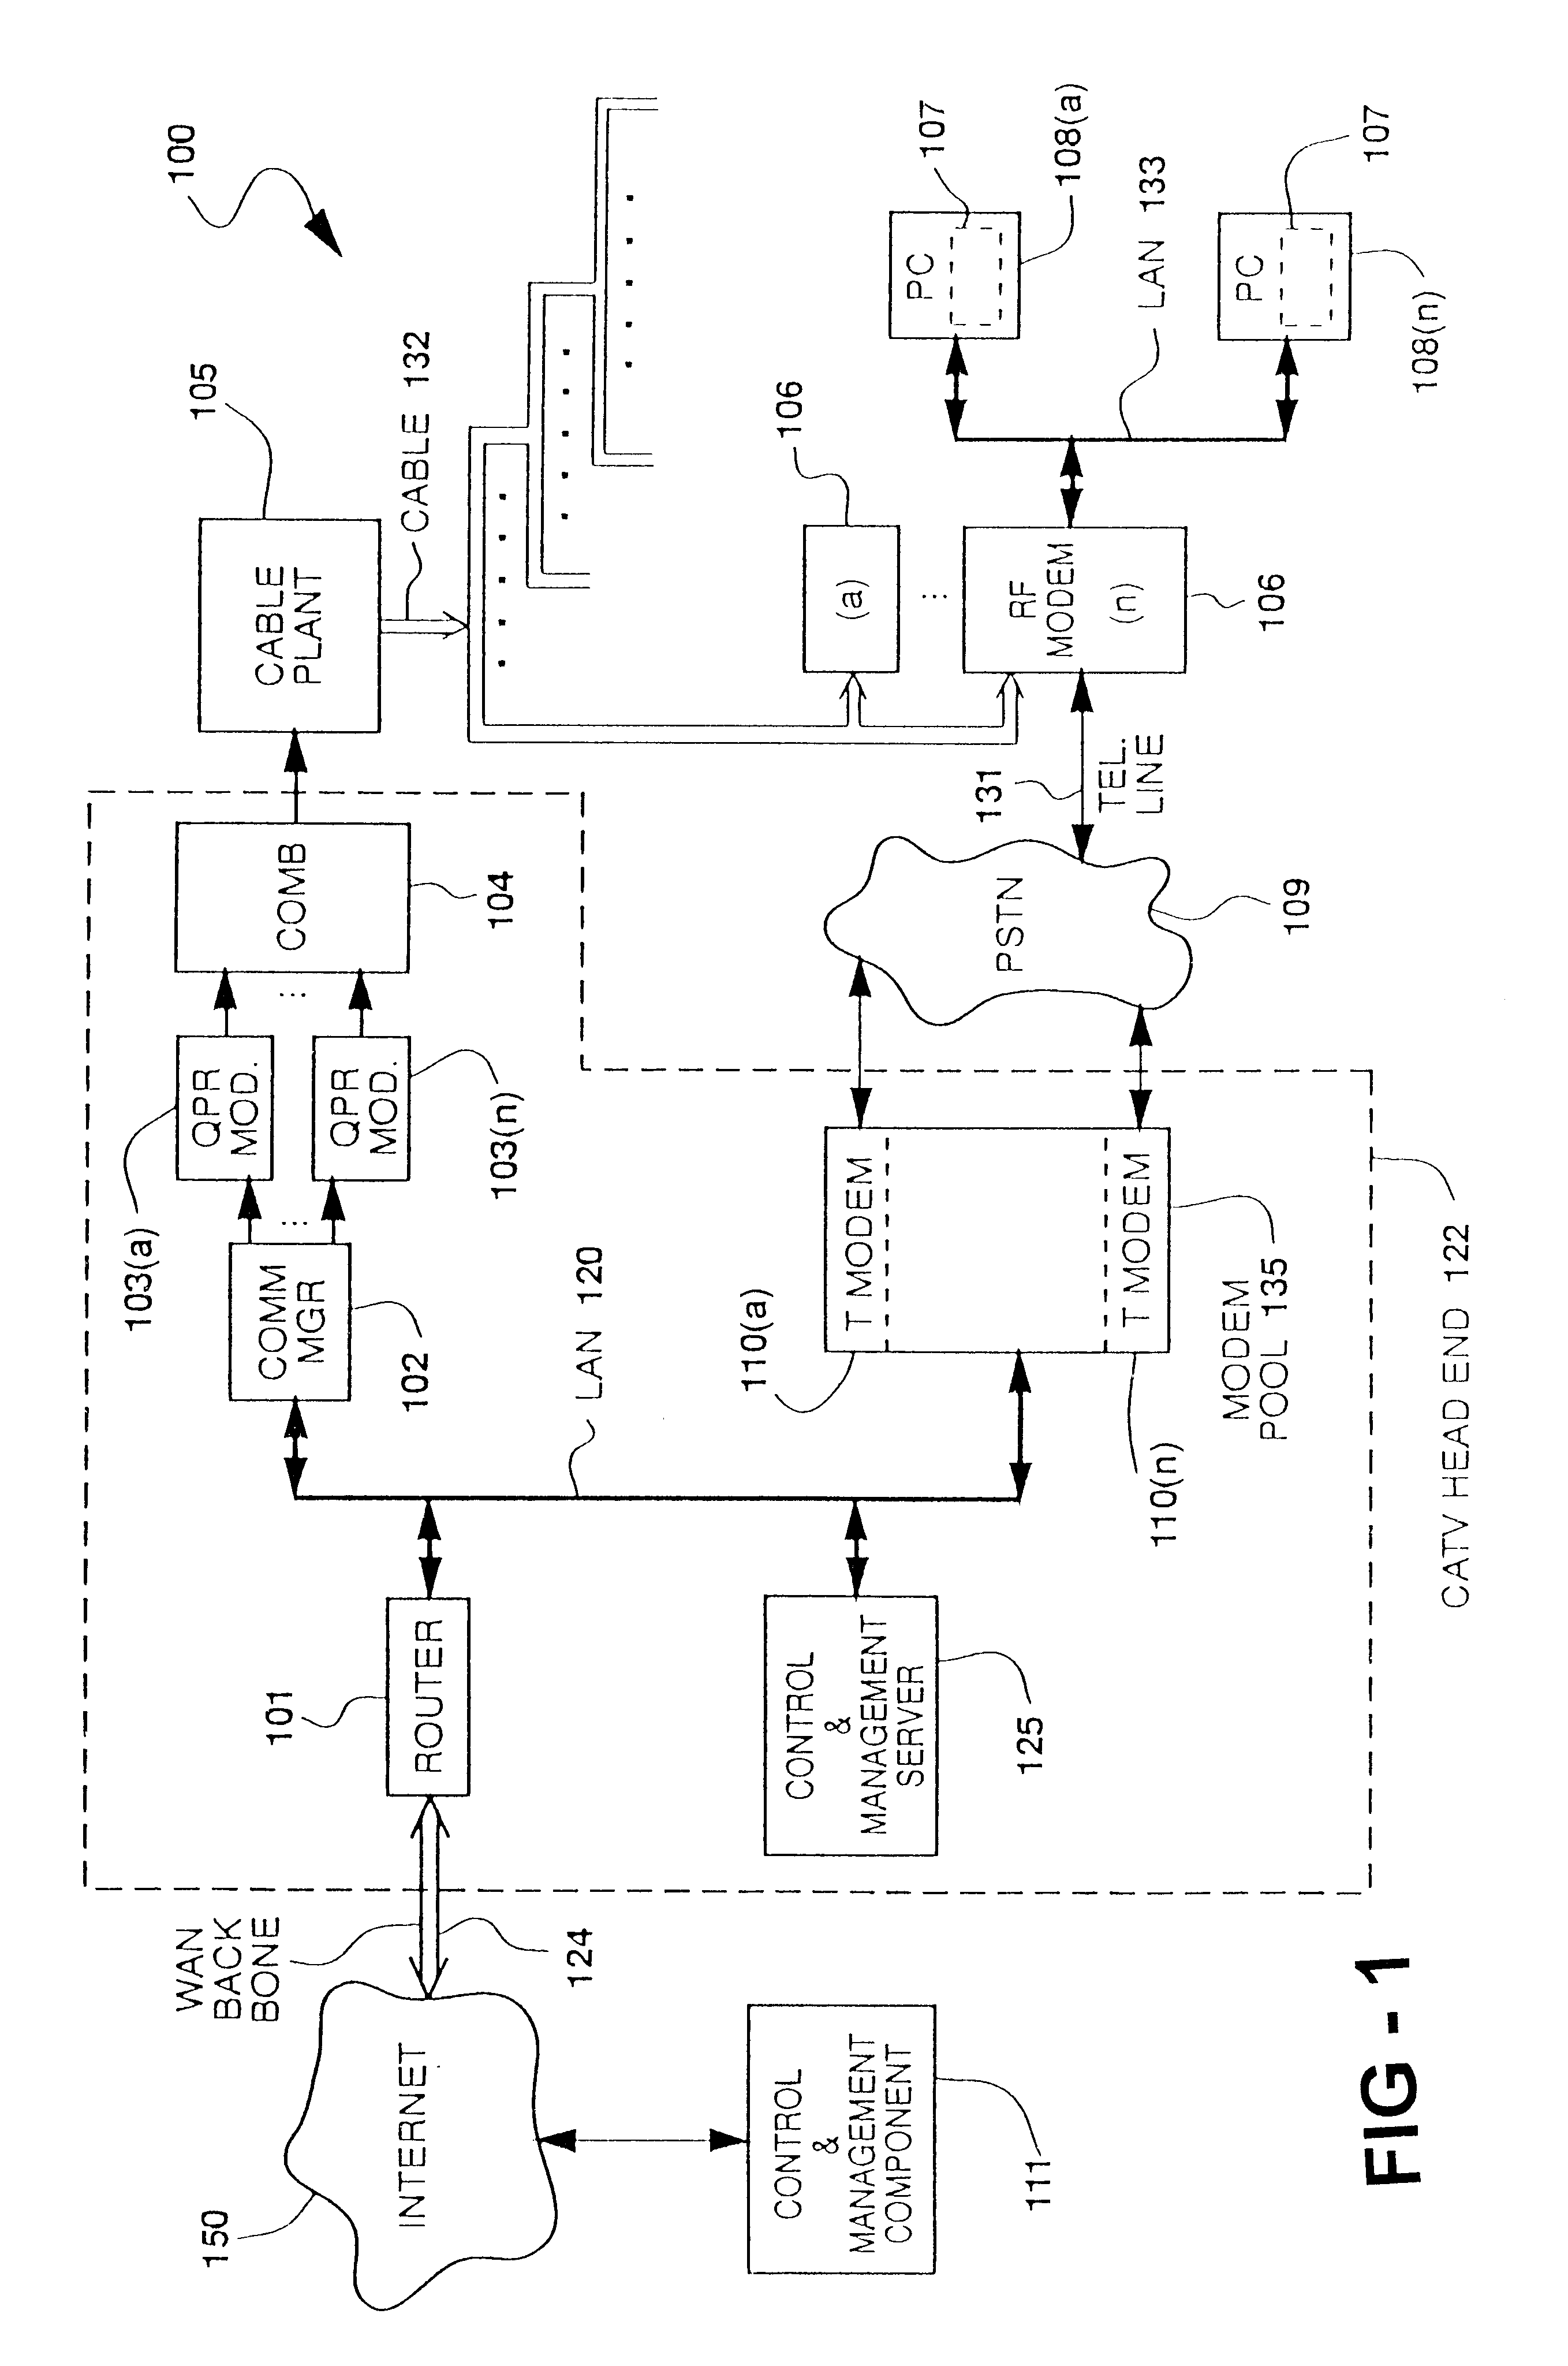 Two-tiered authorization and authentication for a cable data delivery system